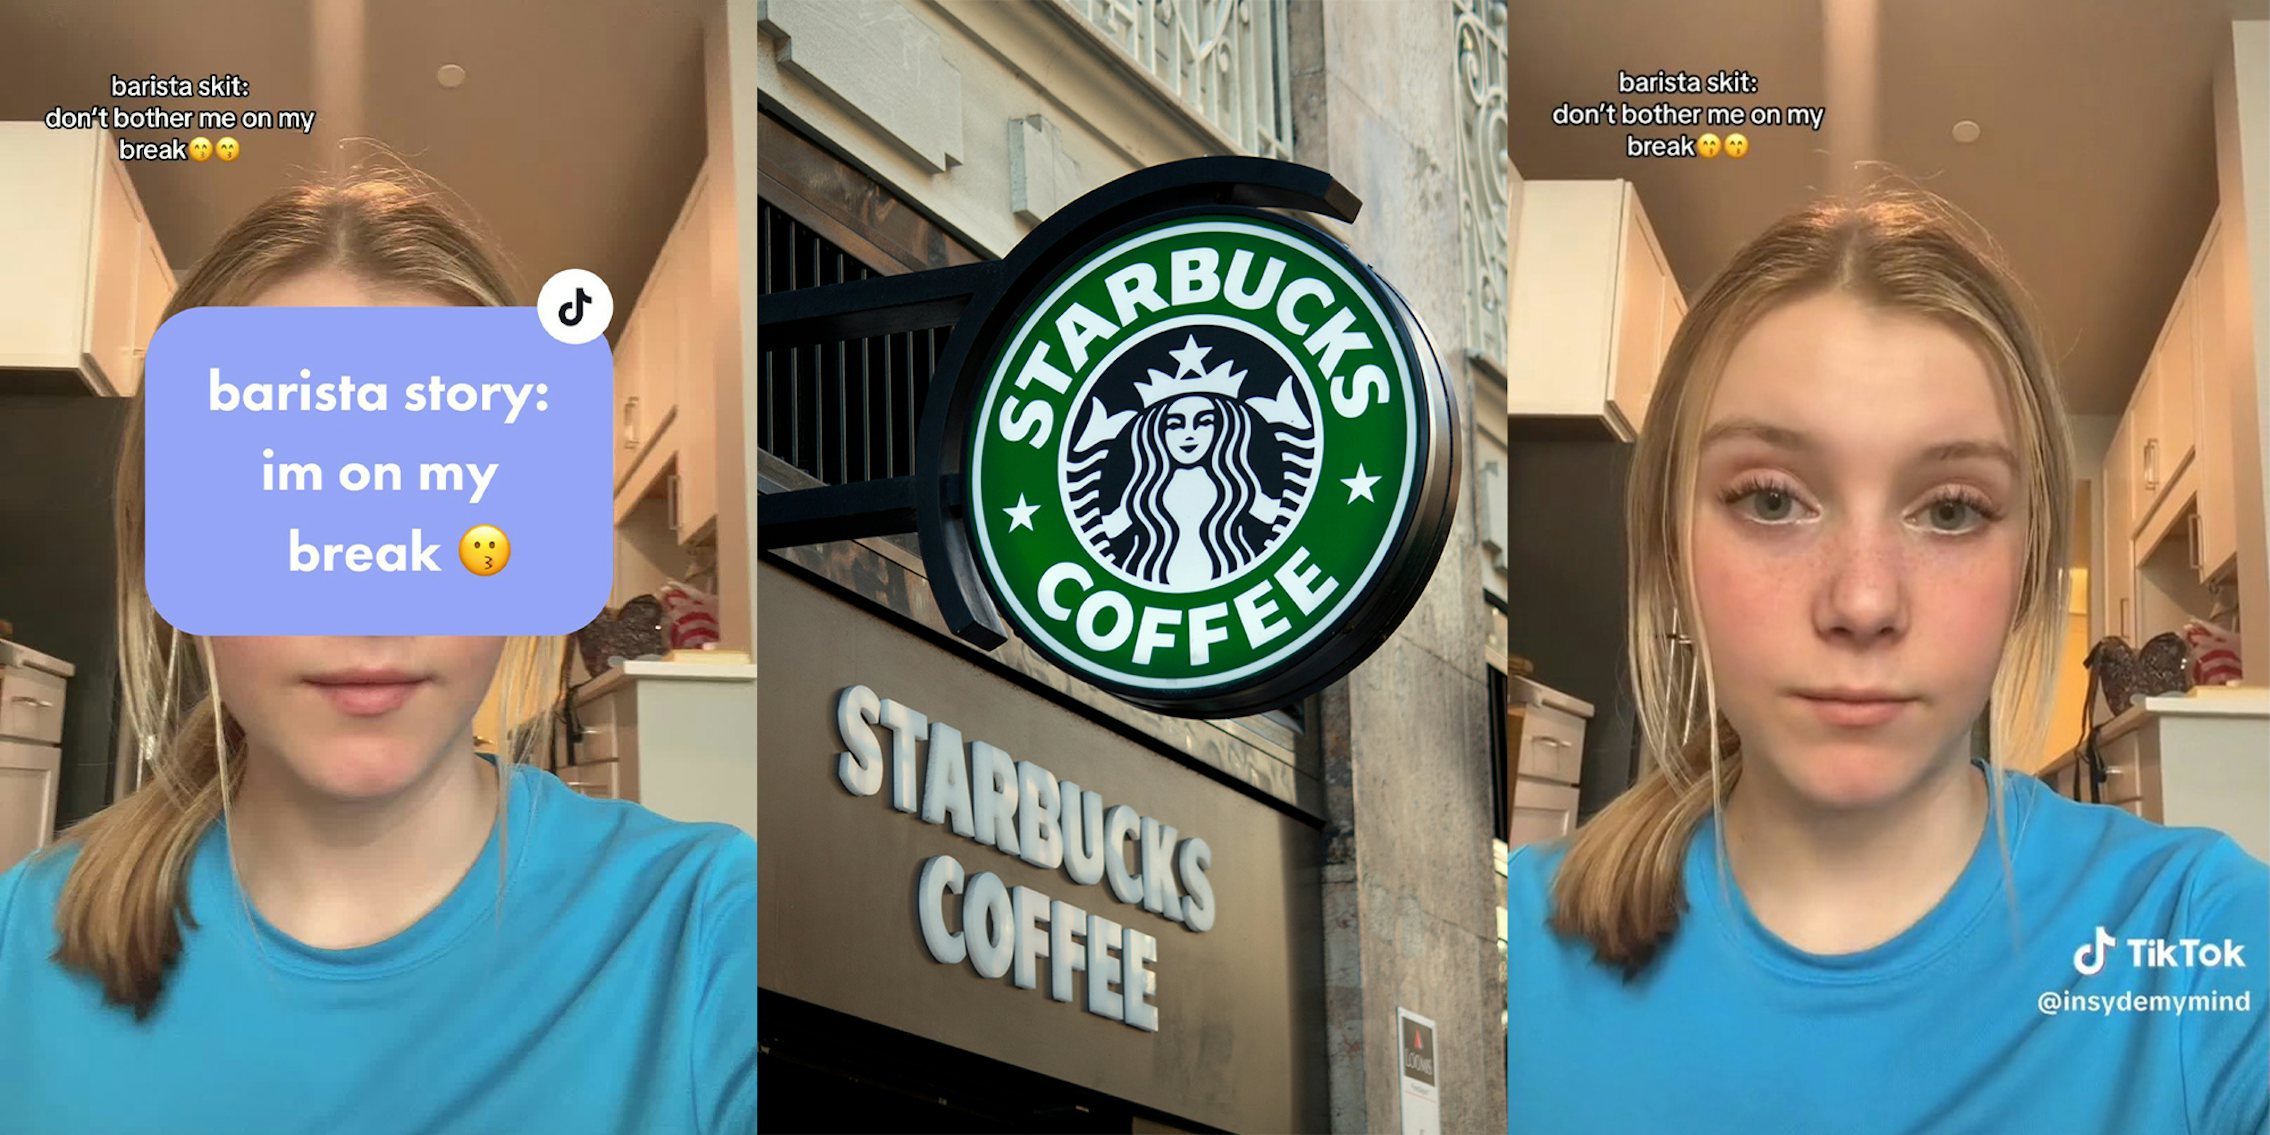 Girl in Blue shirt; Exterior of a Starbucks Coffee coffeehouse.